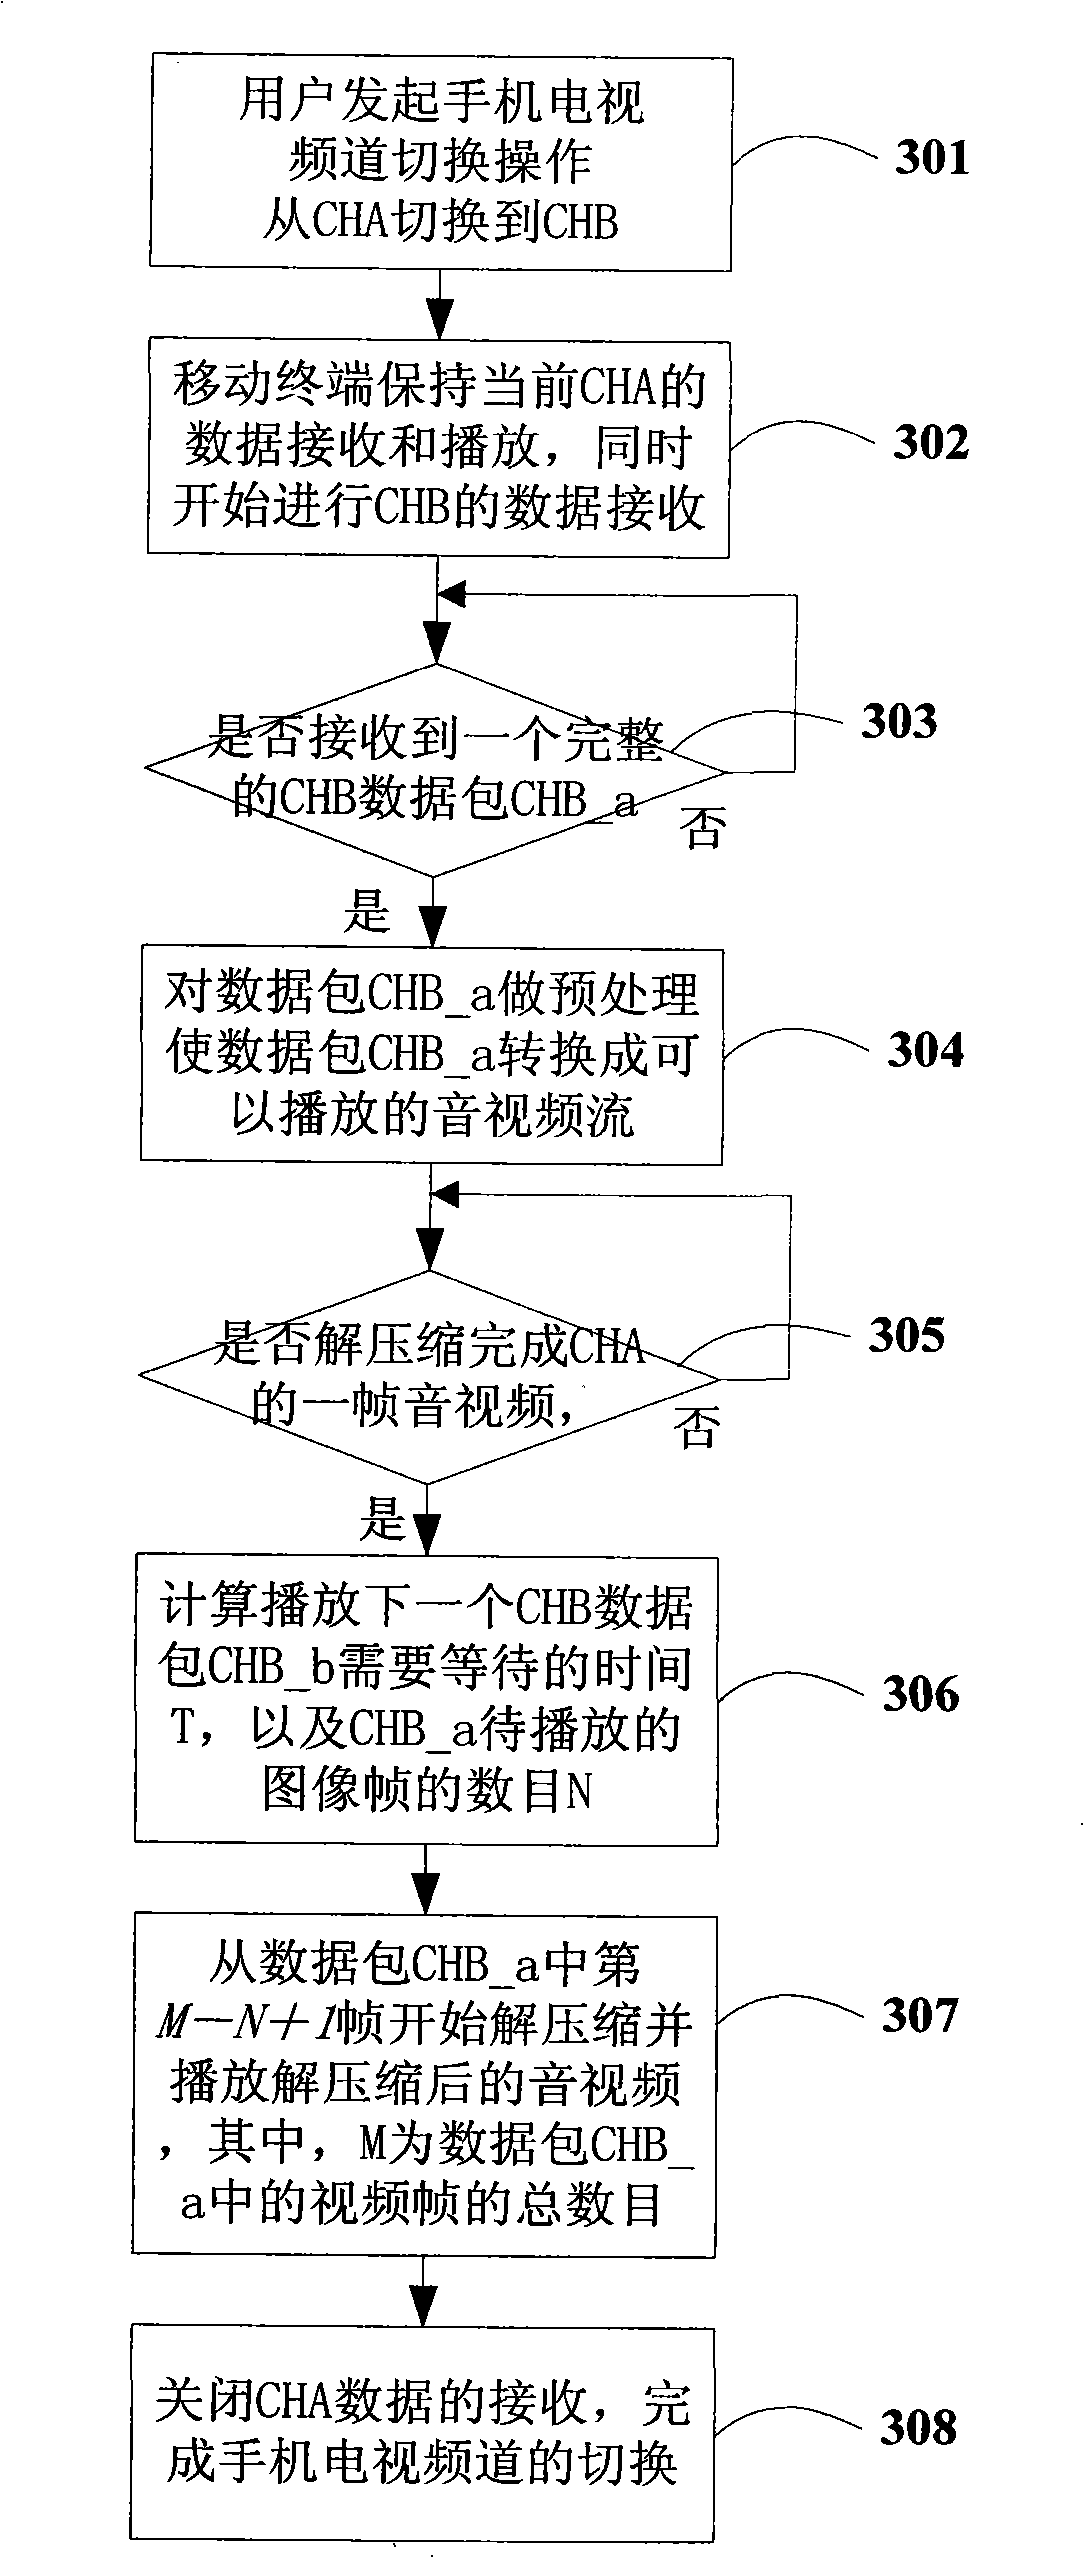 Method and terminal for improving mobile telephone television program broadcasting continuity